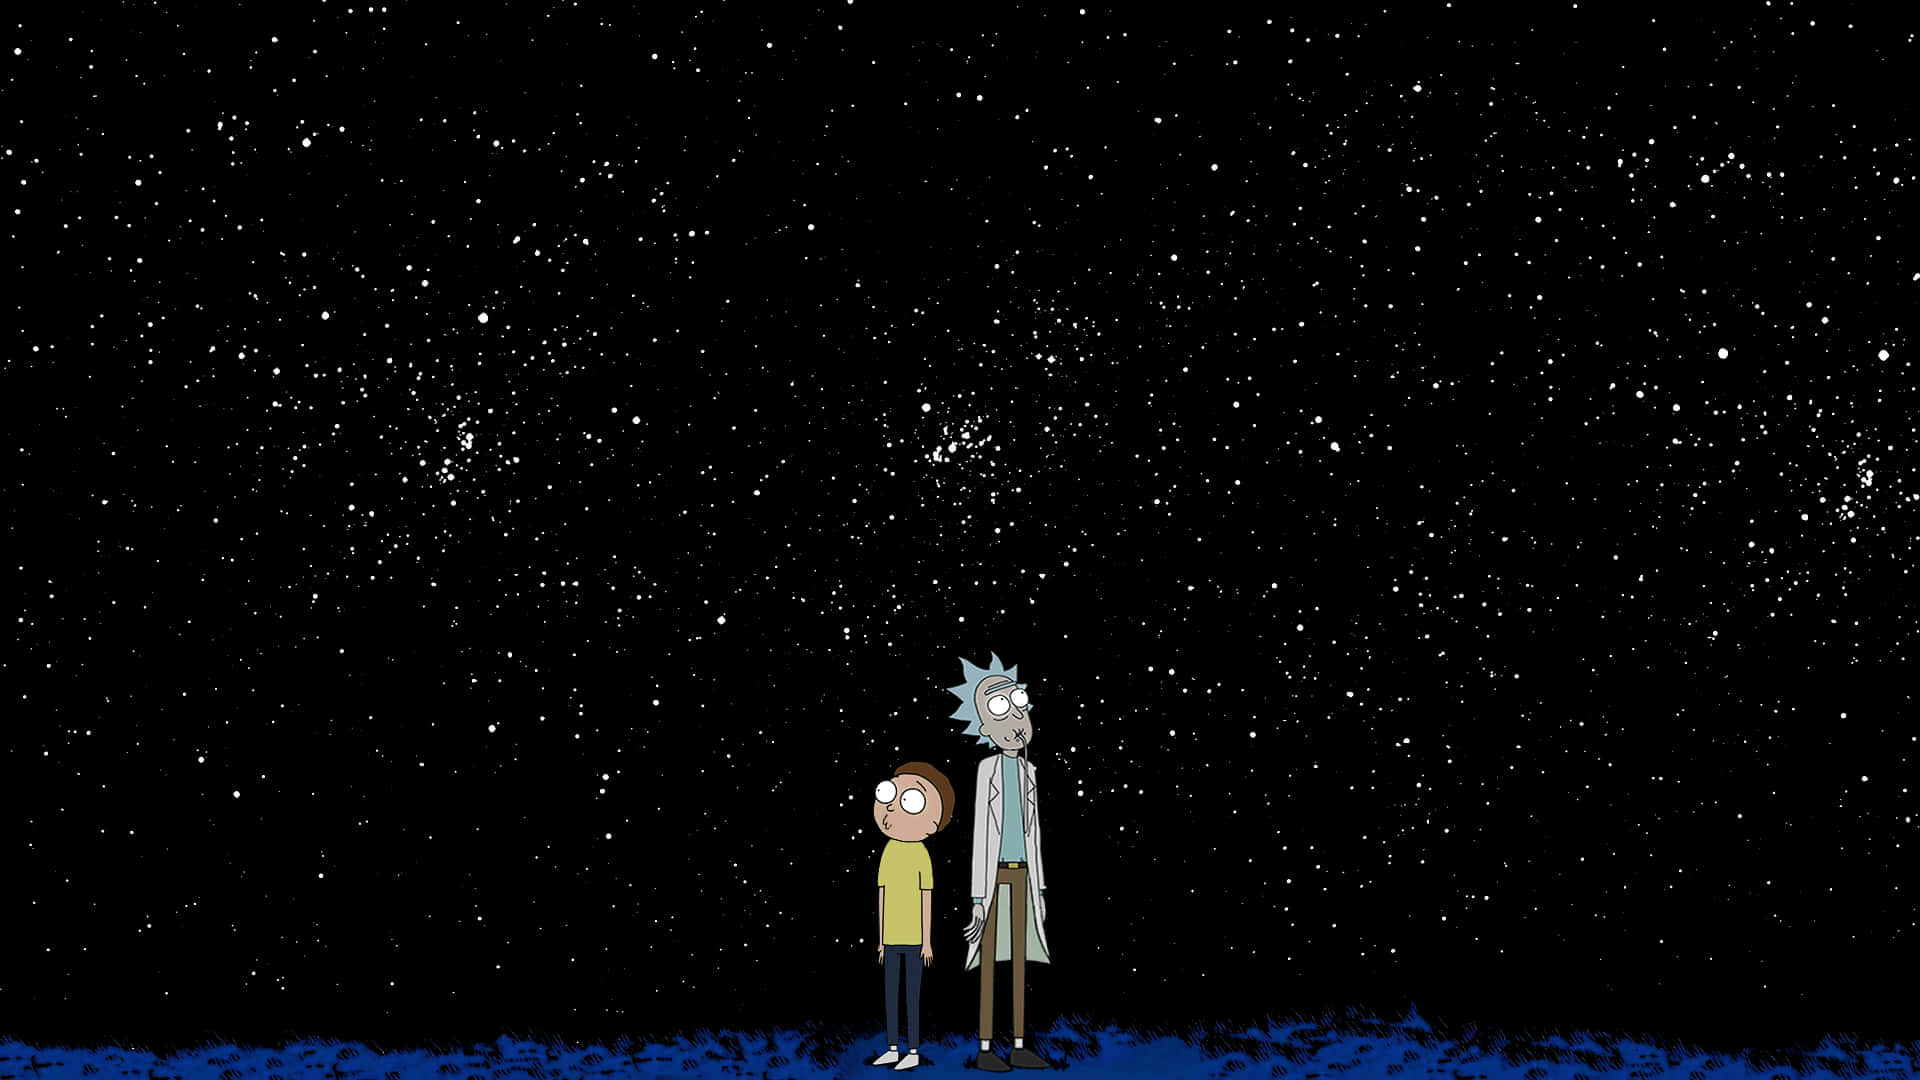 Rick and Morty Getting Weird in the Backwoods Wallpaper